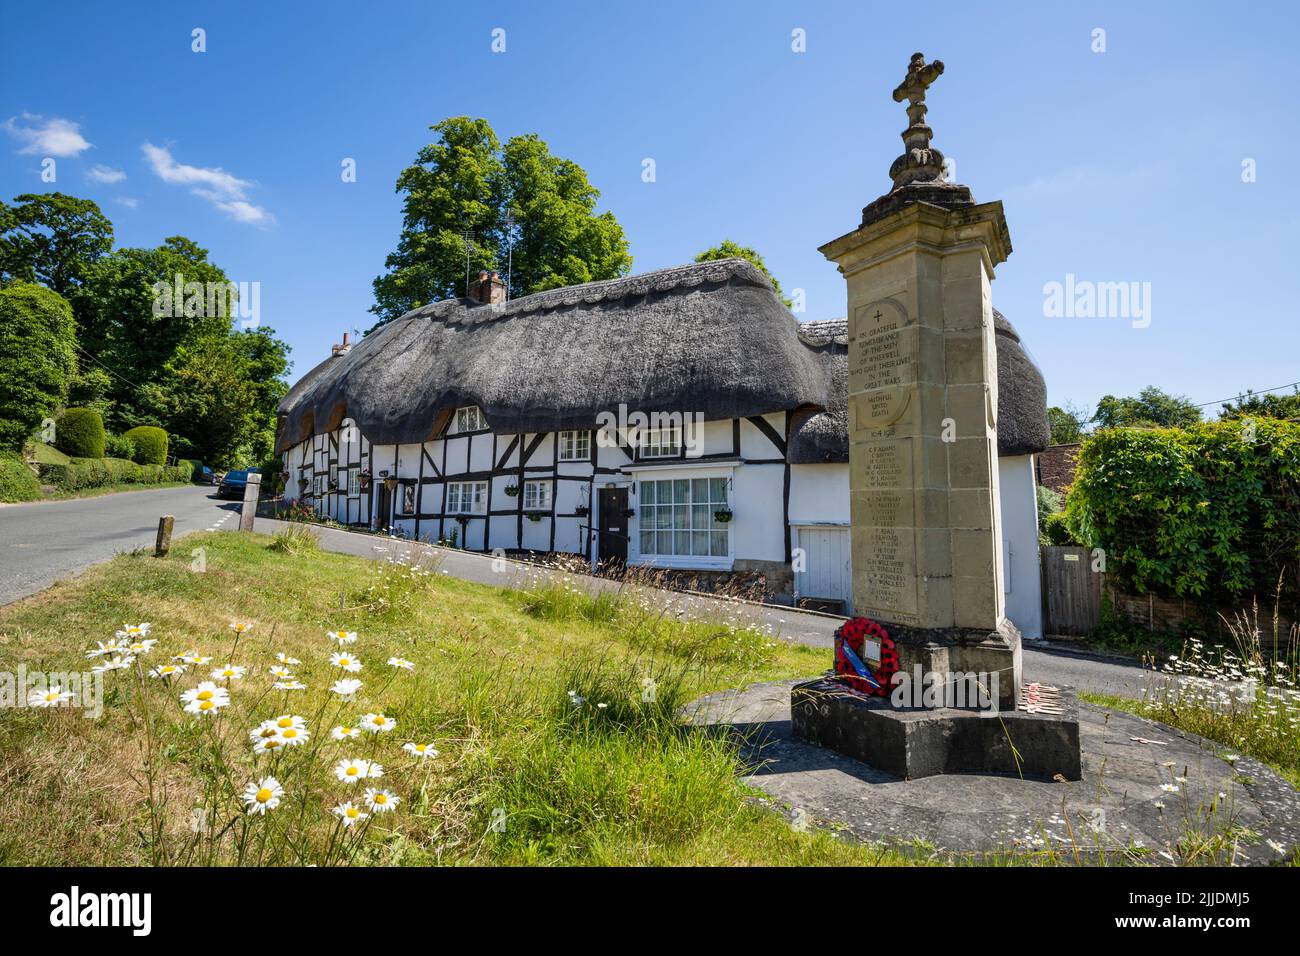 Thatched cottages and the War Memorial in the village square, Wherwell, Test Valley, Hampshire, England, United Kingdom, Europe Stock Photo